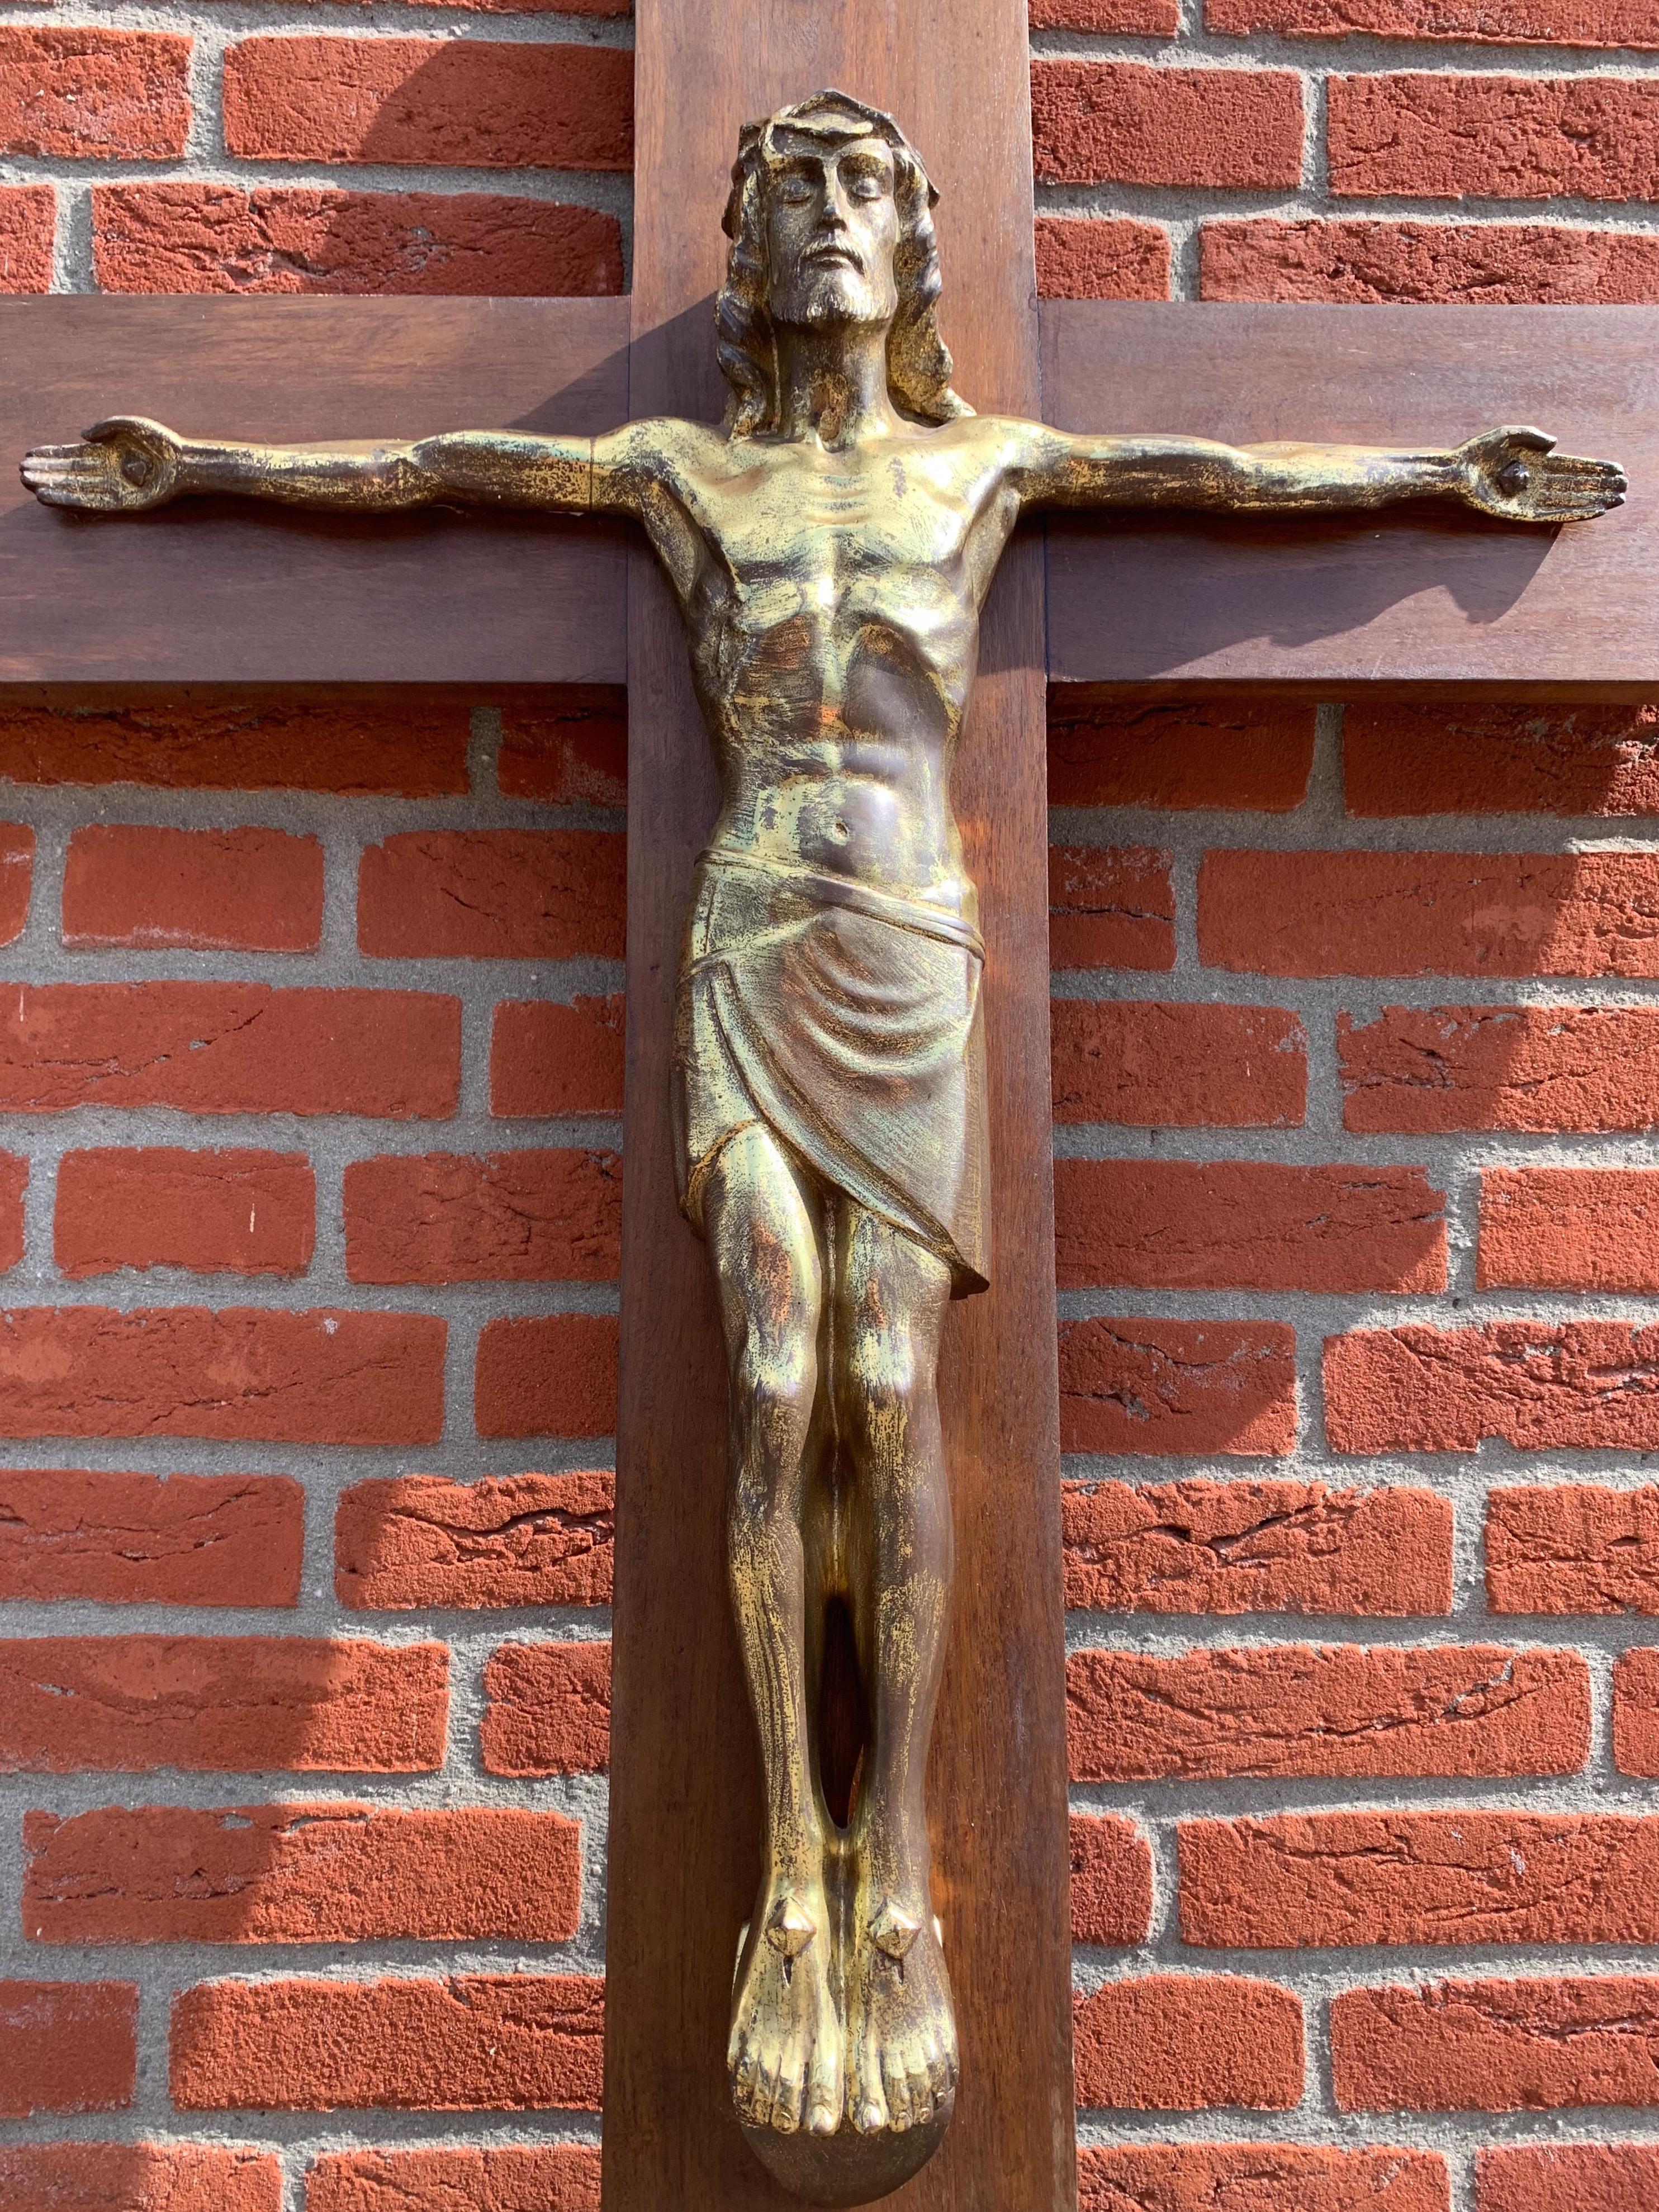 Beautiful sculpture and an impressive religious work of art.

Looking at Christ on the cross, the crucifix (in our view) is a symbol of what 'telling people the truth' can lead to. 'The truth does not have many friends' is something I once read.